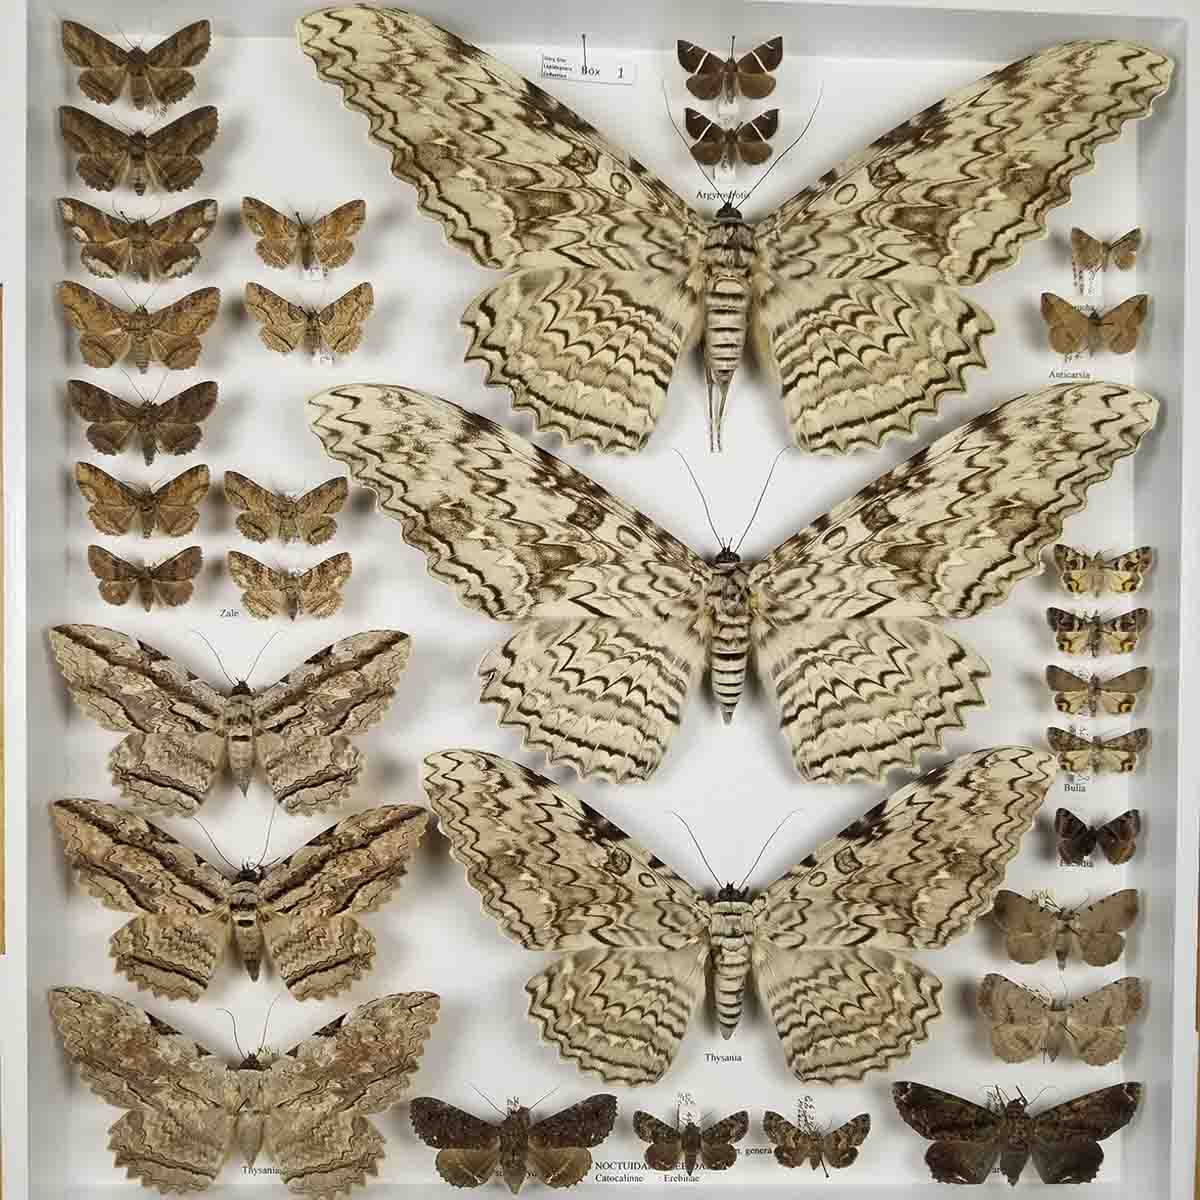 A variety of tannish brown moths